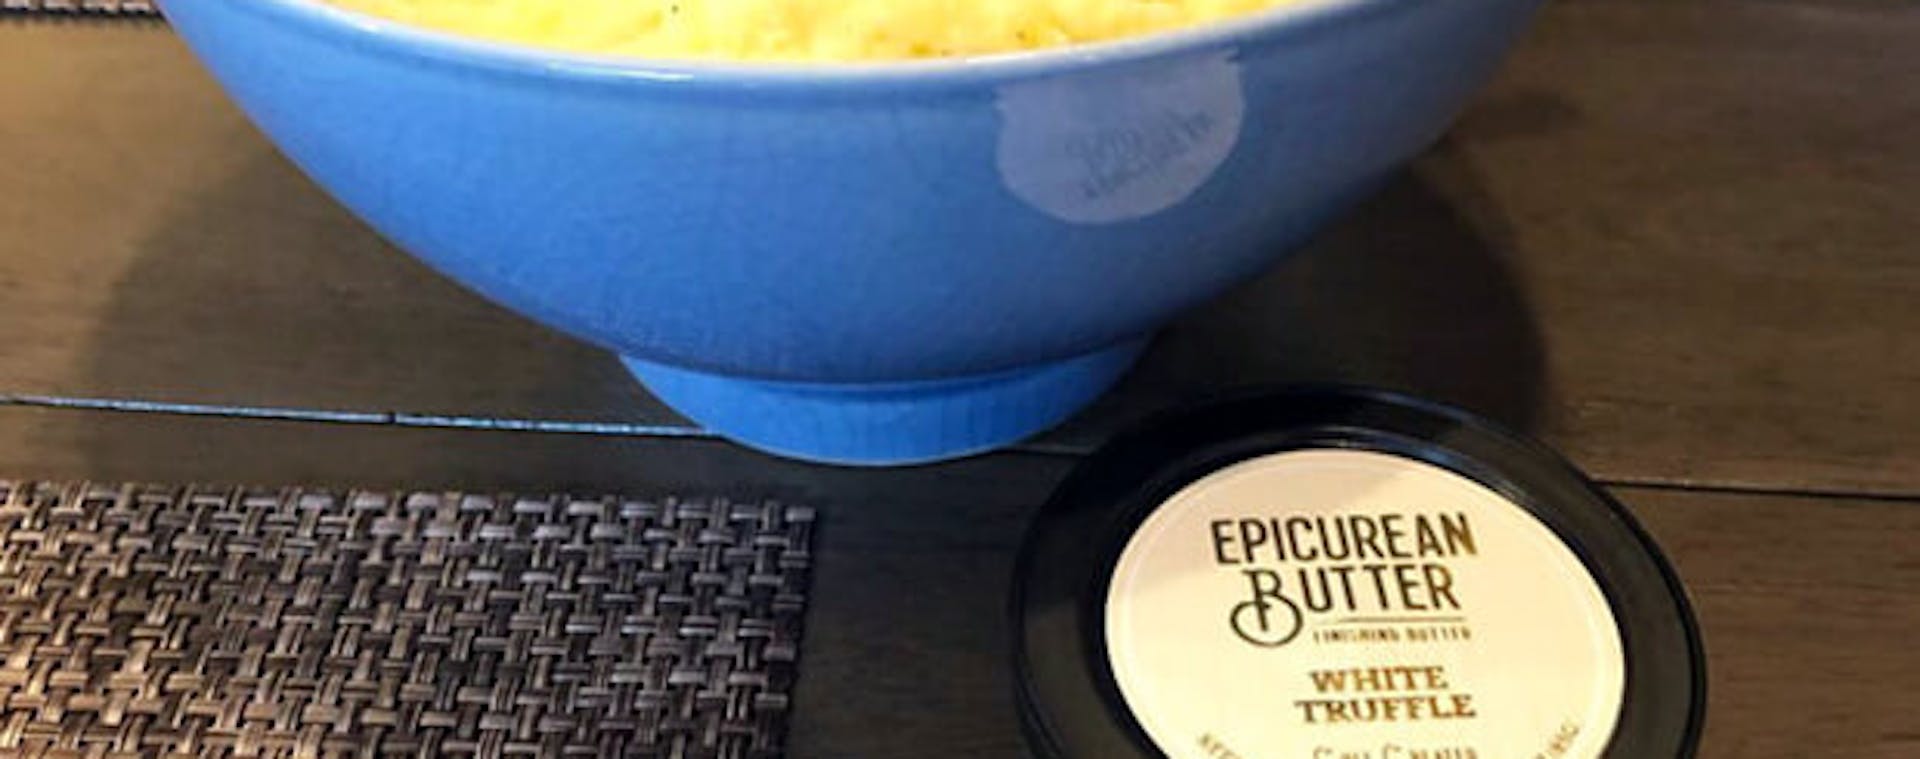 Mashed Potatoes with White Truffle Butter